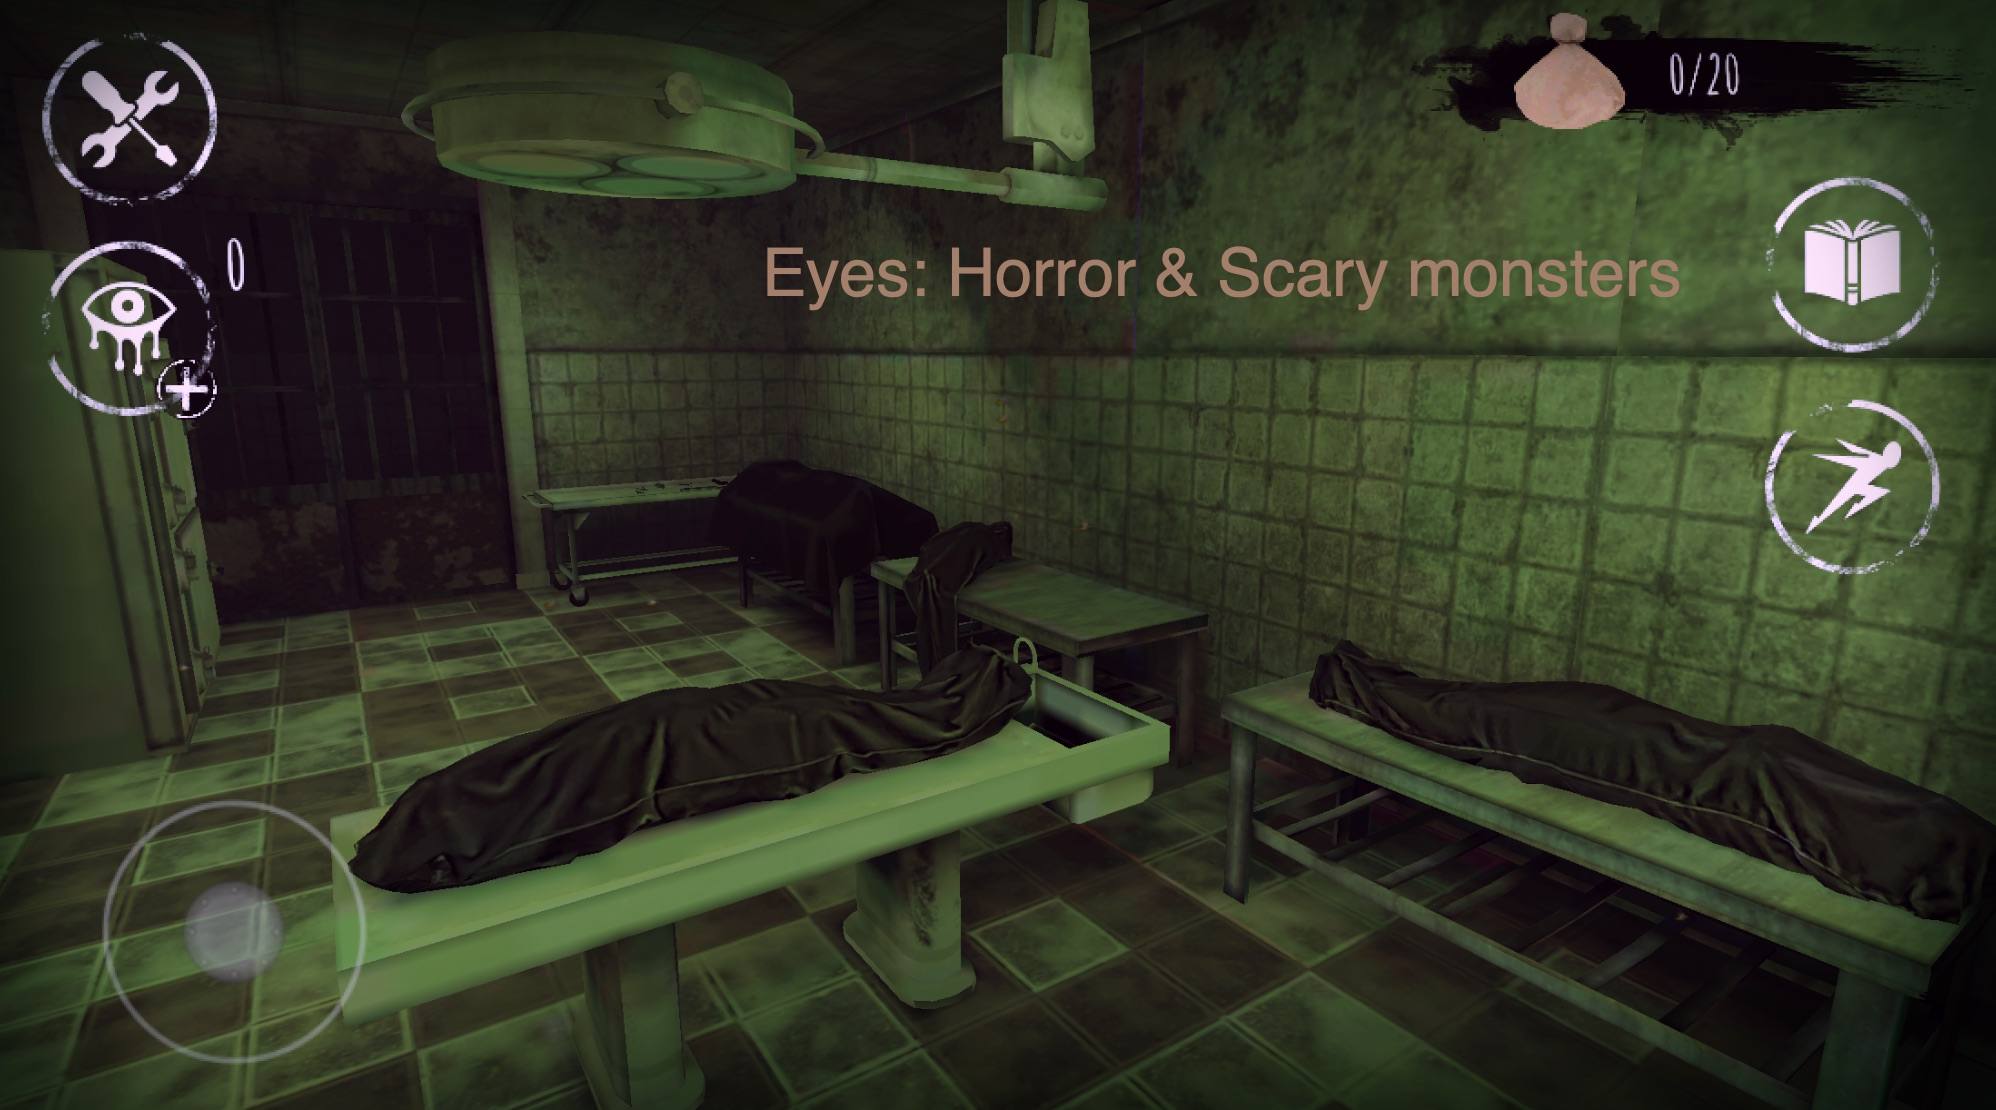 Eyes: Horror & Scary monsters